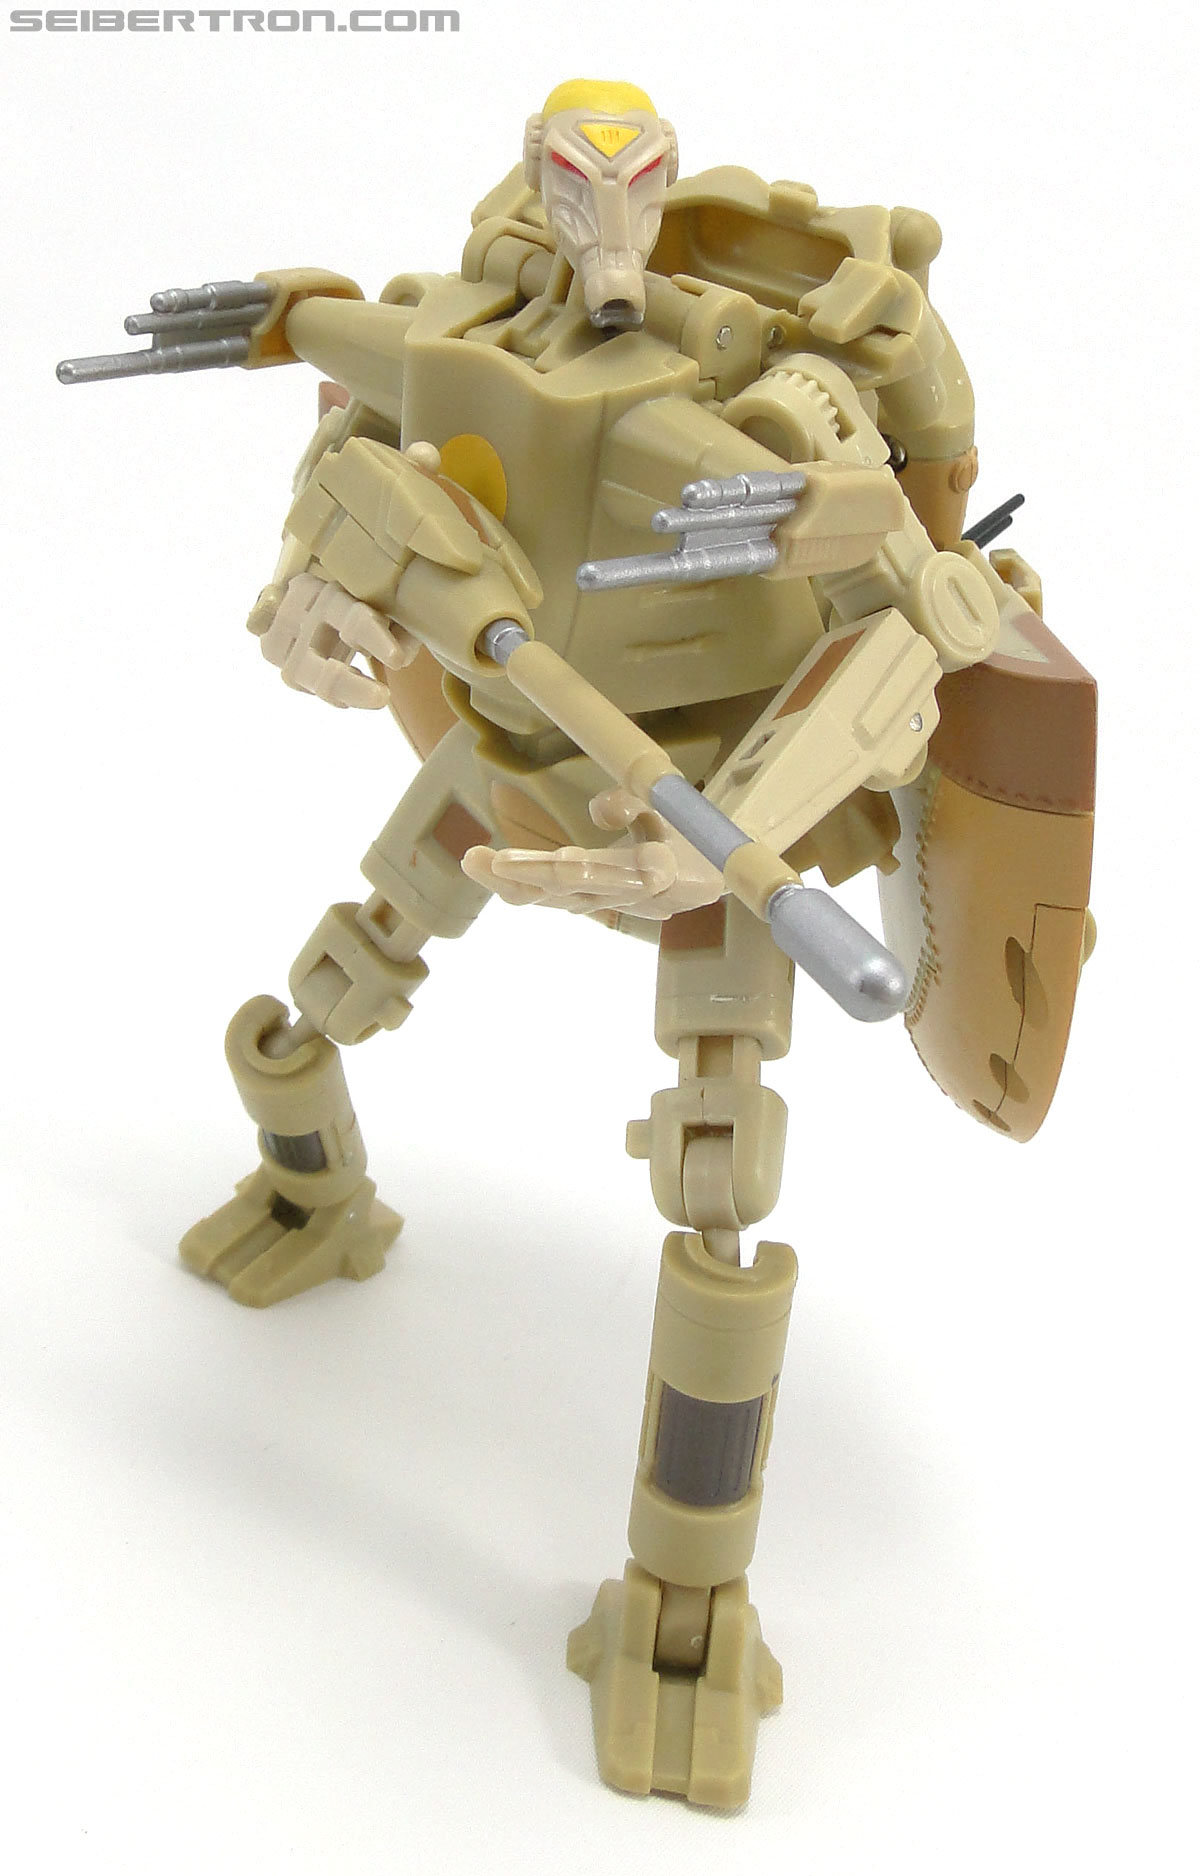 Star Wars Transformers Battle Droid Commader (Armored Assault Tank) (Battle Droid Commader) (Image #64 of 85)